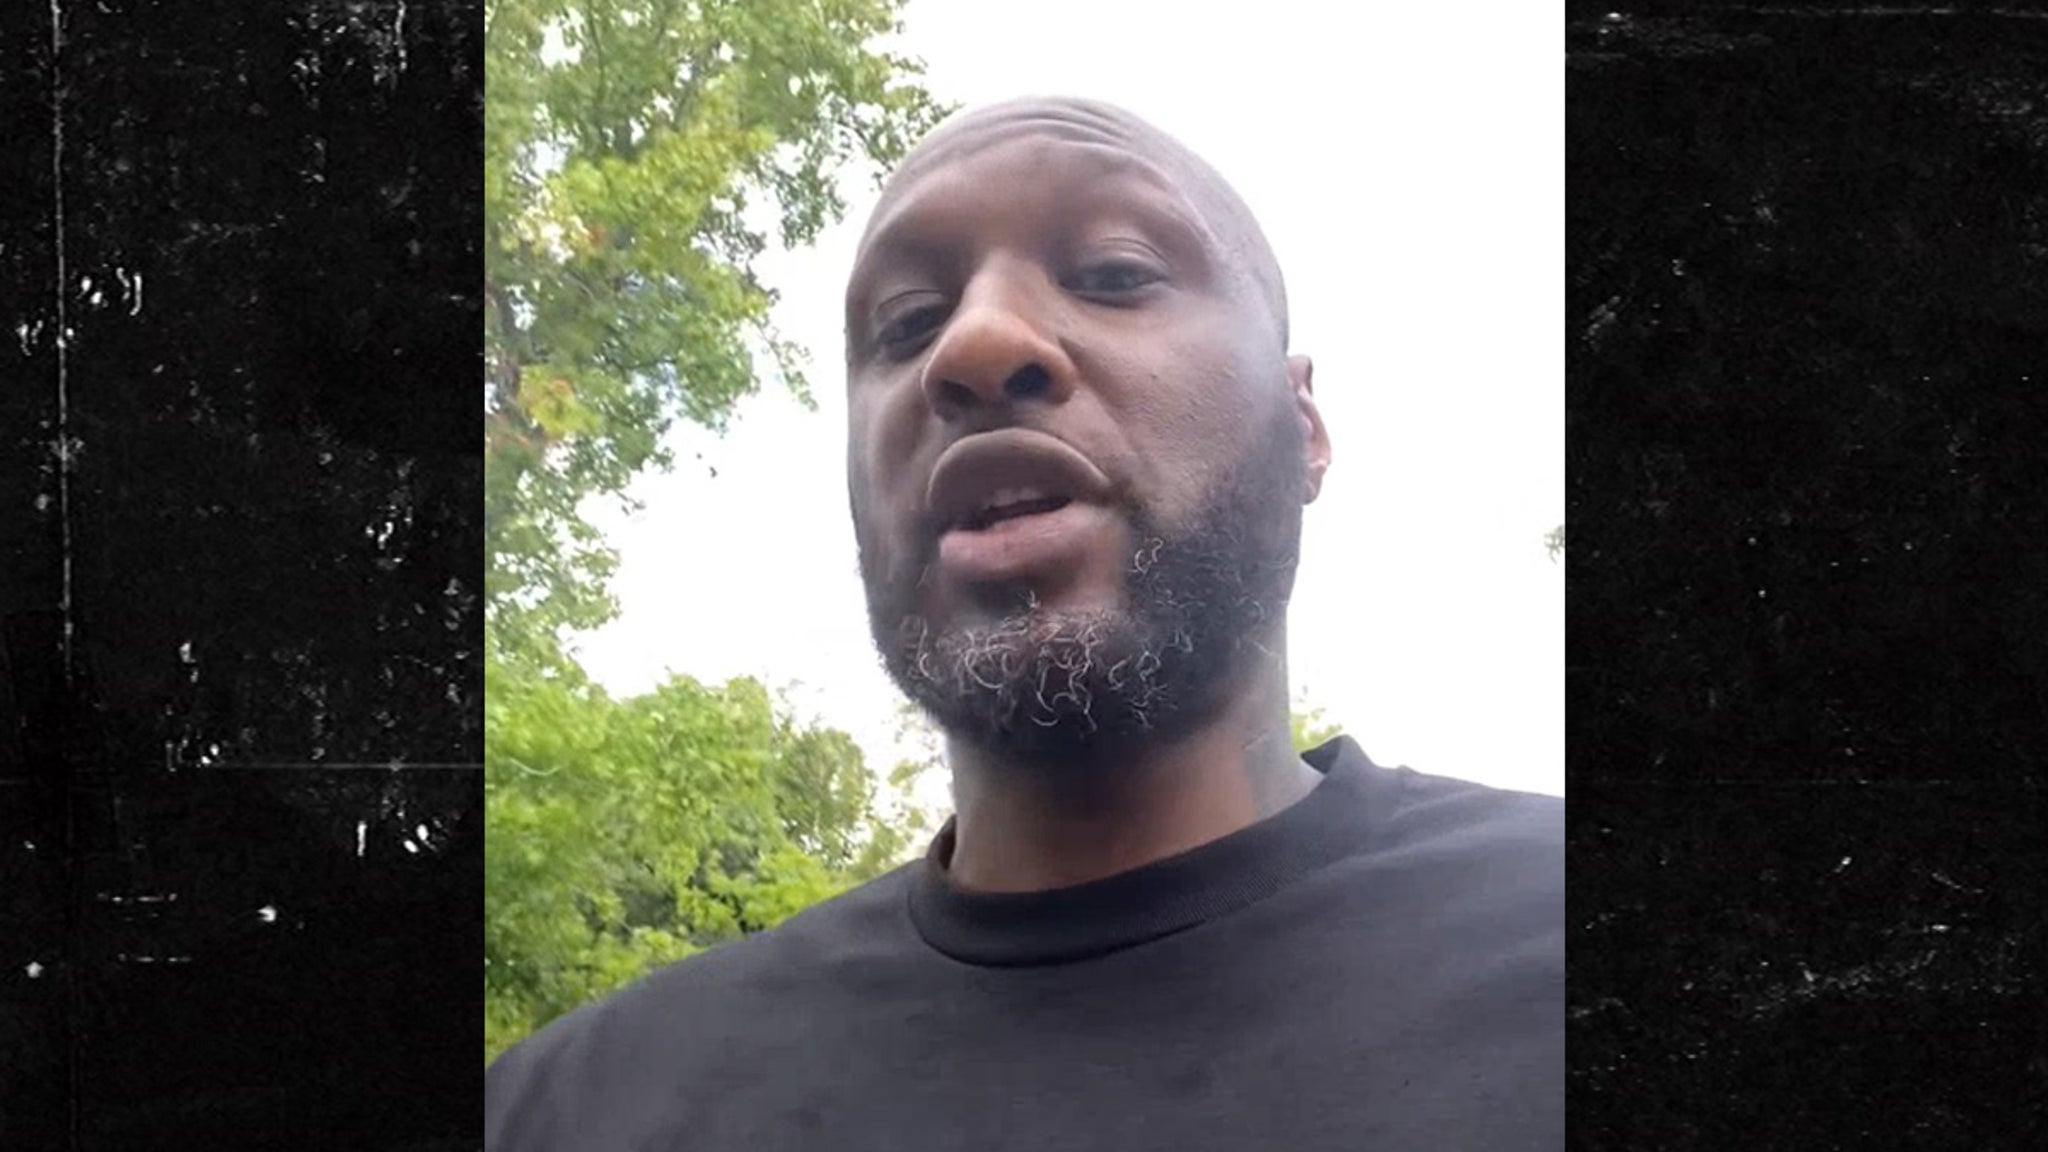 Lamar Odom says his social media was hacked by former management